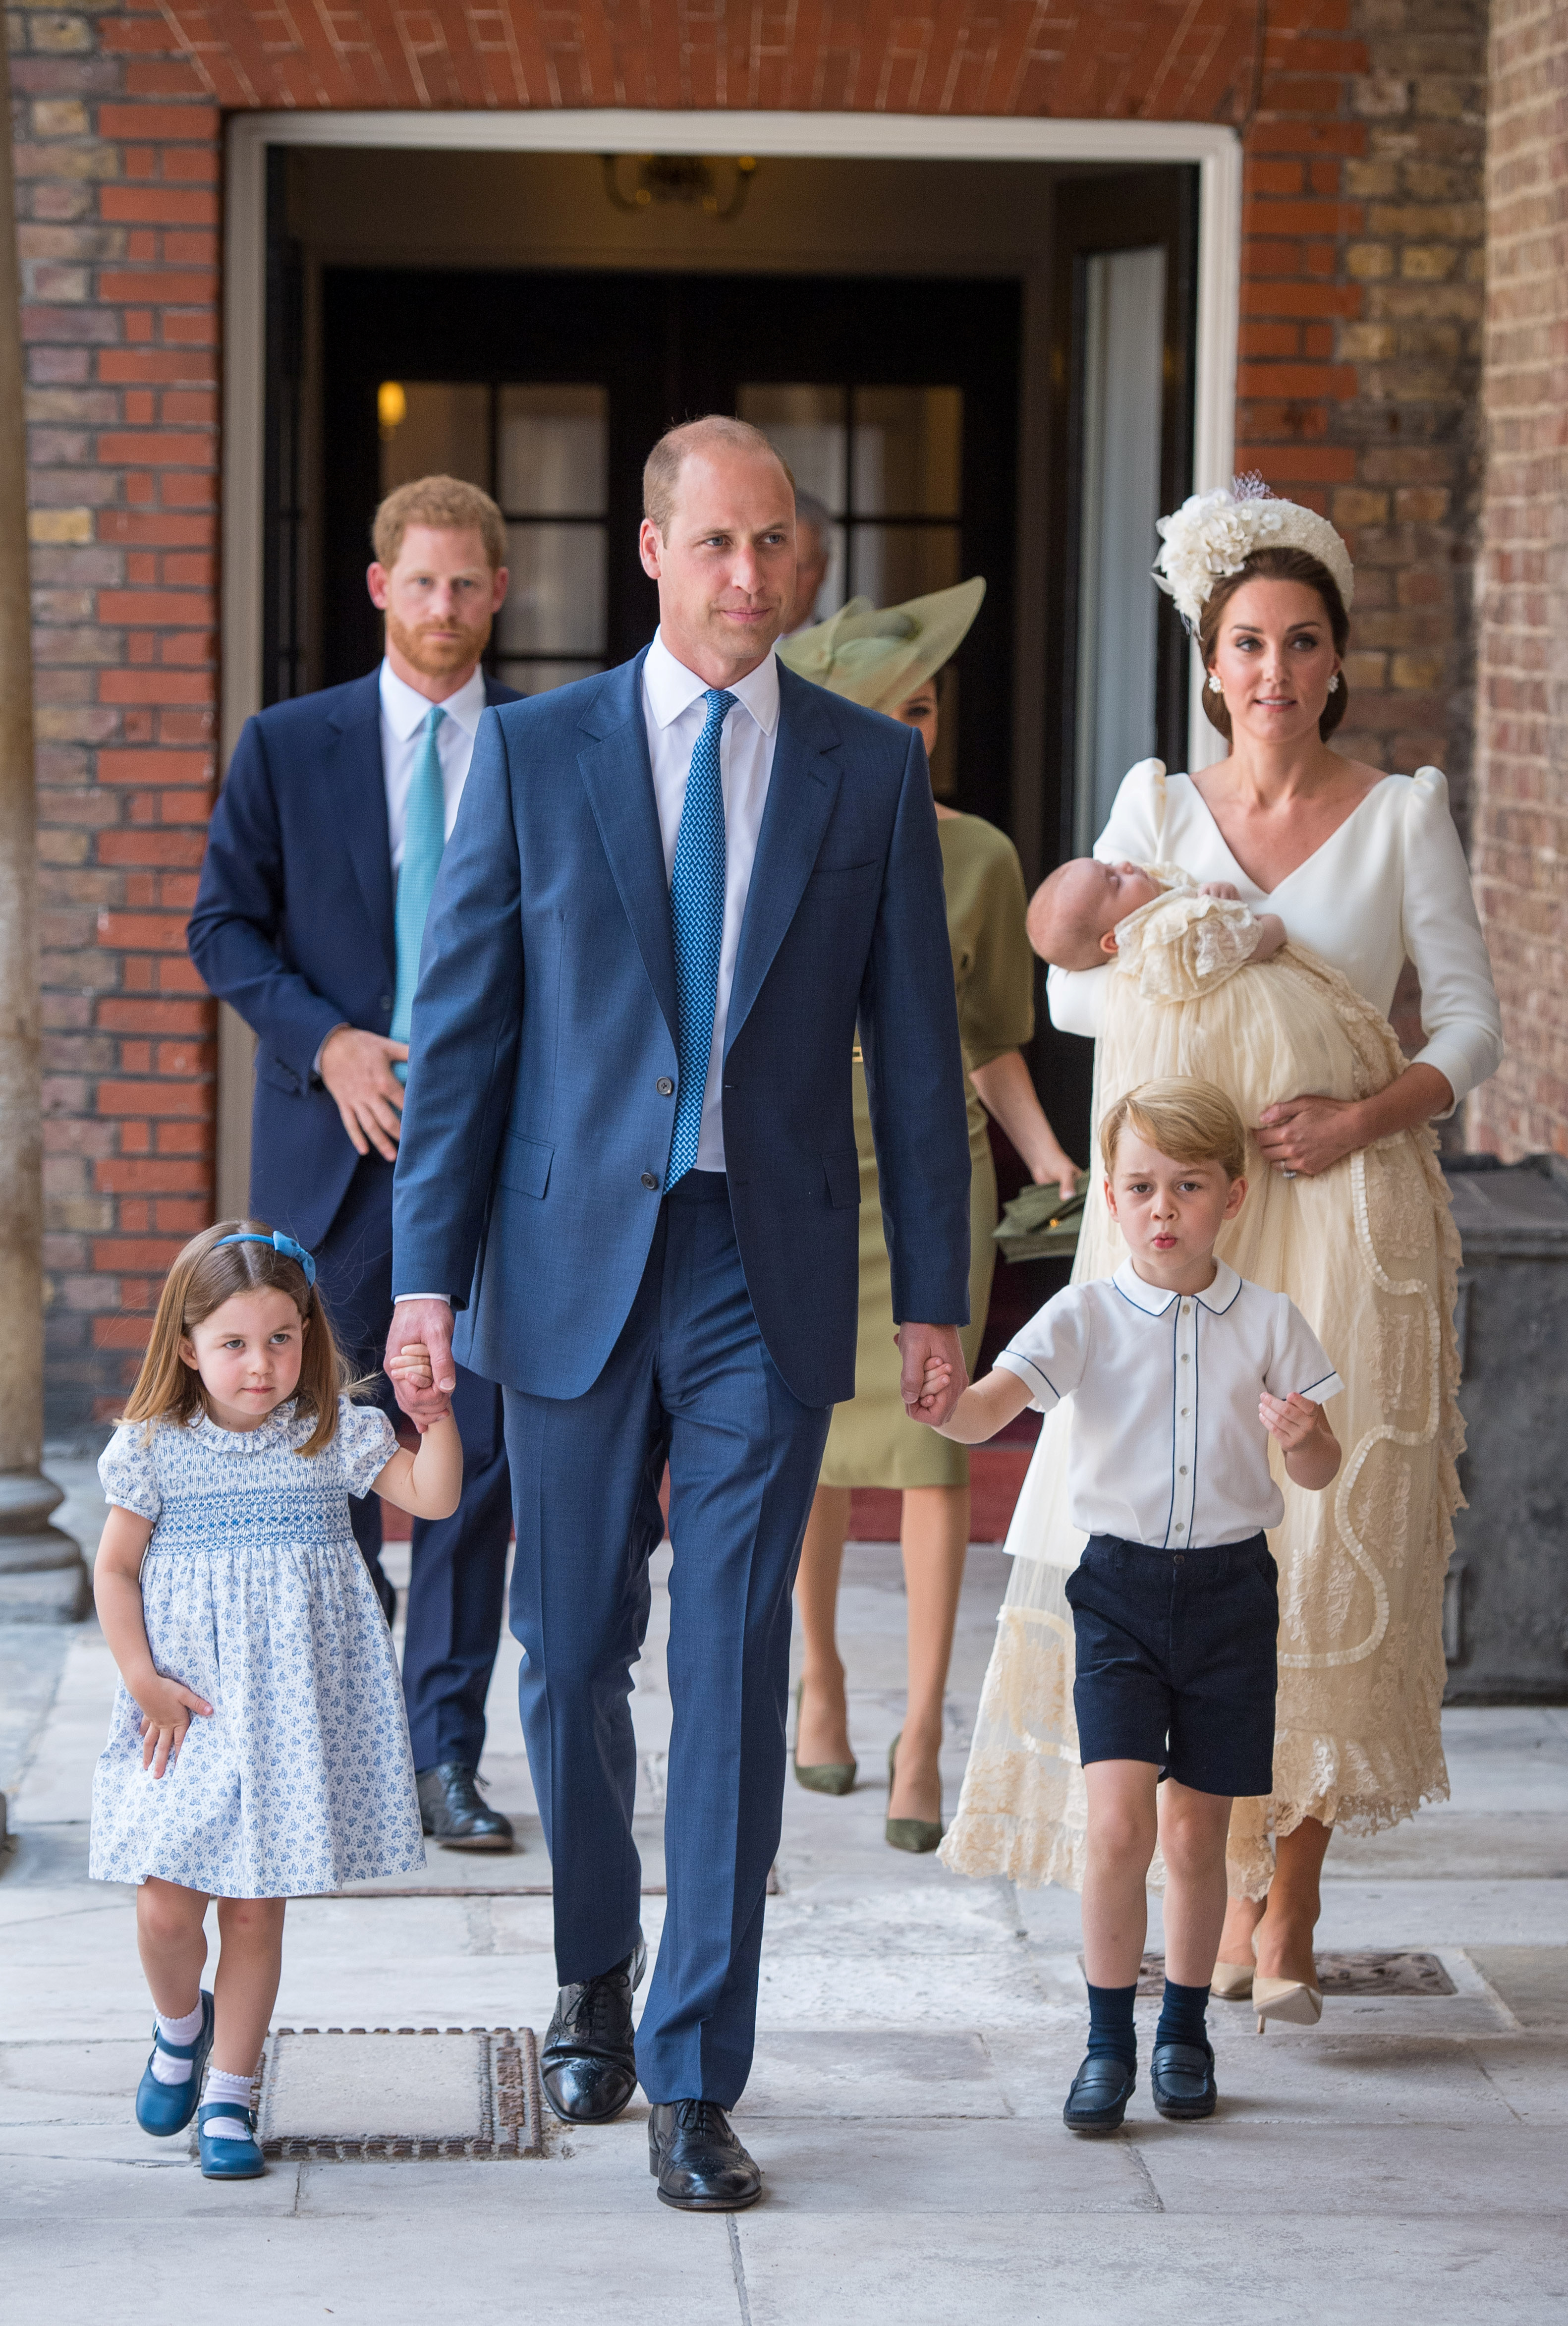 Britain's Princess Charlotte and Prince George hold the hands of their father, William, the Duke of Cambridge, as they arrive for the christening of their brother, Prince Louis, who is being carried by their mother, Catherine, the Duchess of Cambridge, at the Chapel Royal, St James's Palace, London, Britain, July 9, 2018. Dominic Lipinski/Pool via REUTERS - RC1DE7ED1E70